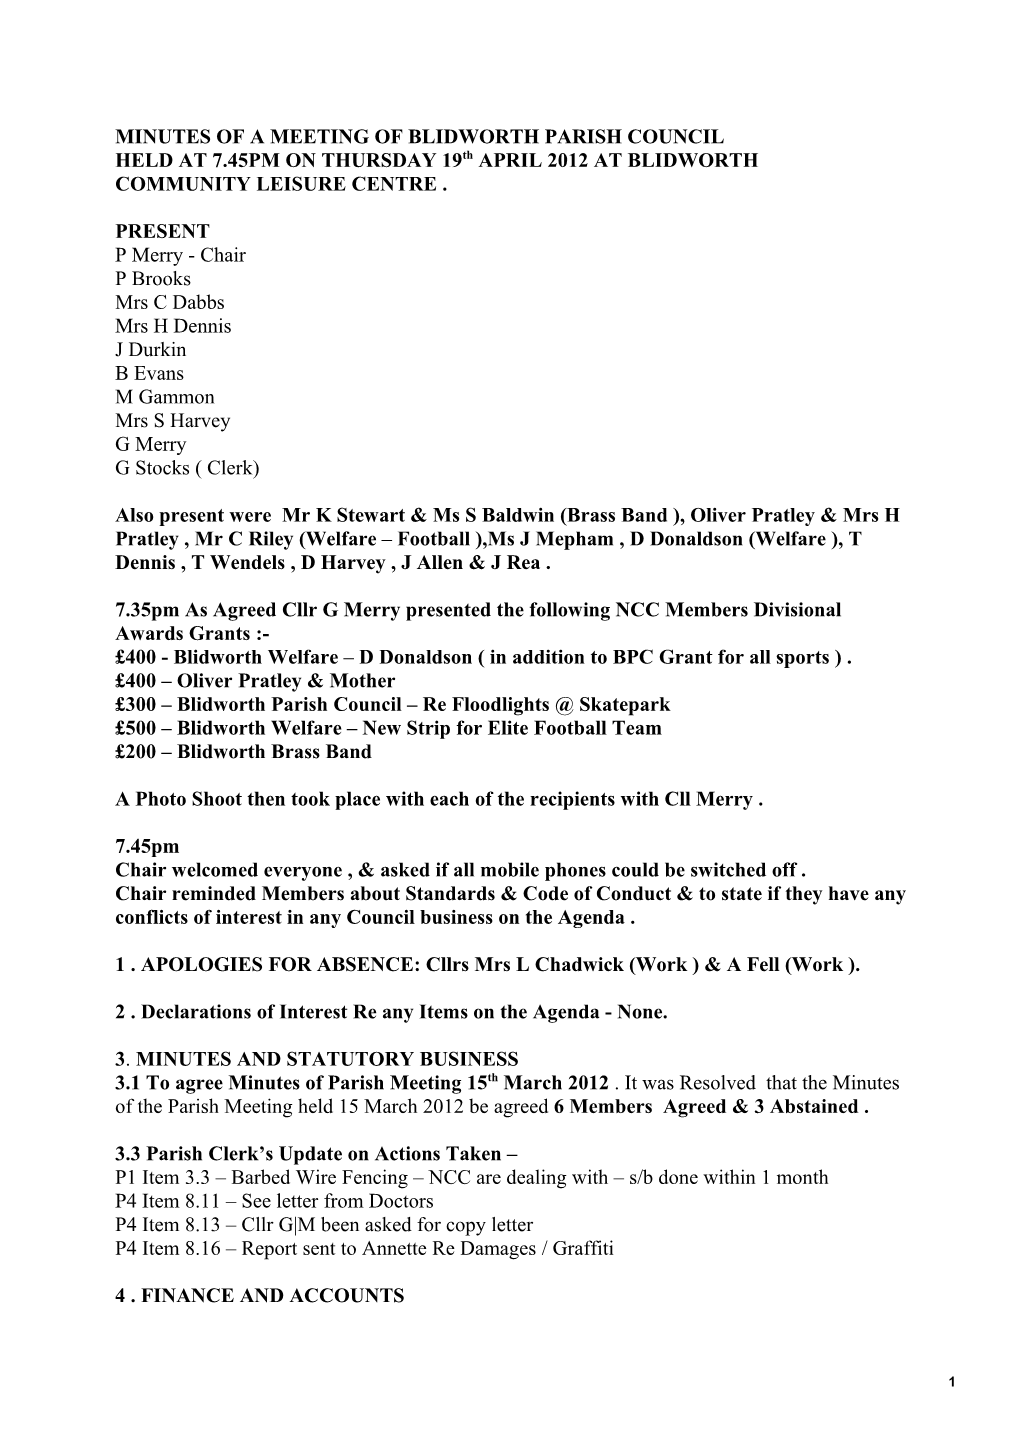 Minutes of a Meeting of Blidworth Parish Council s1